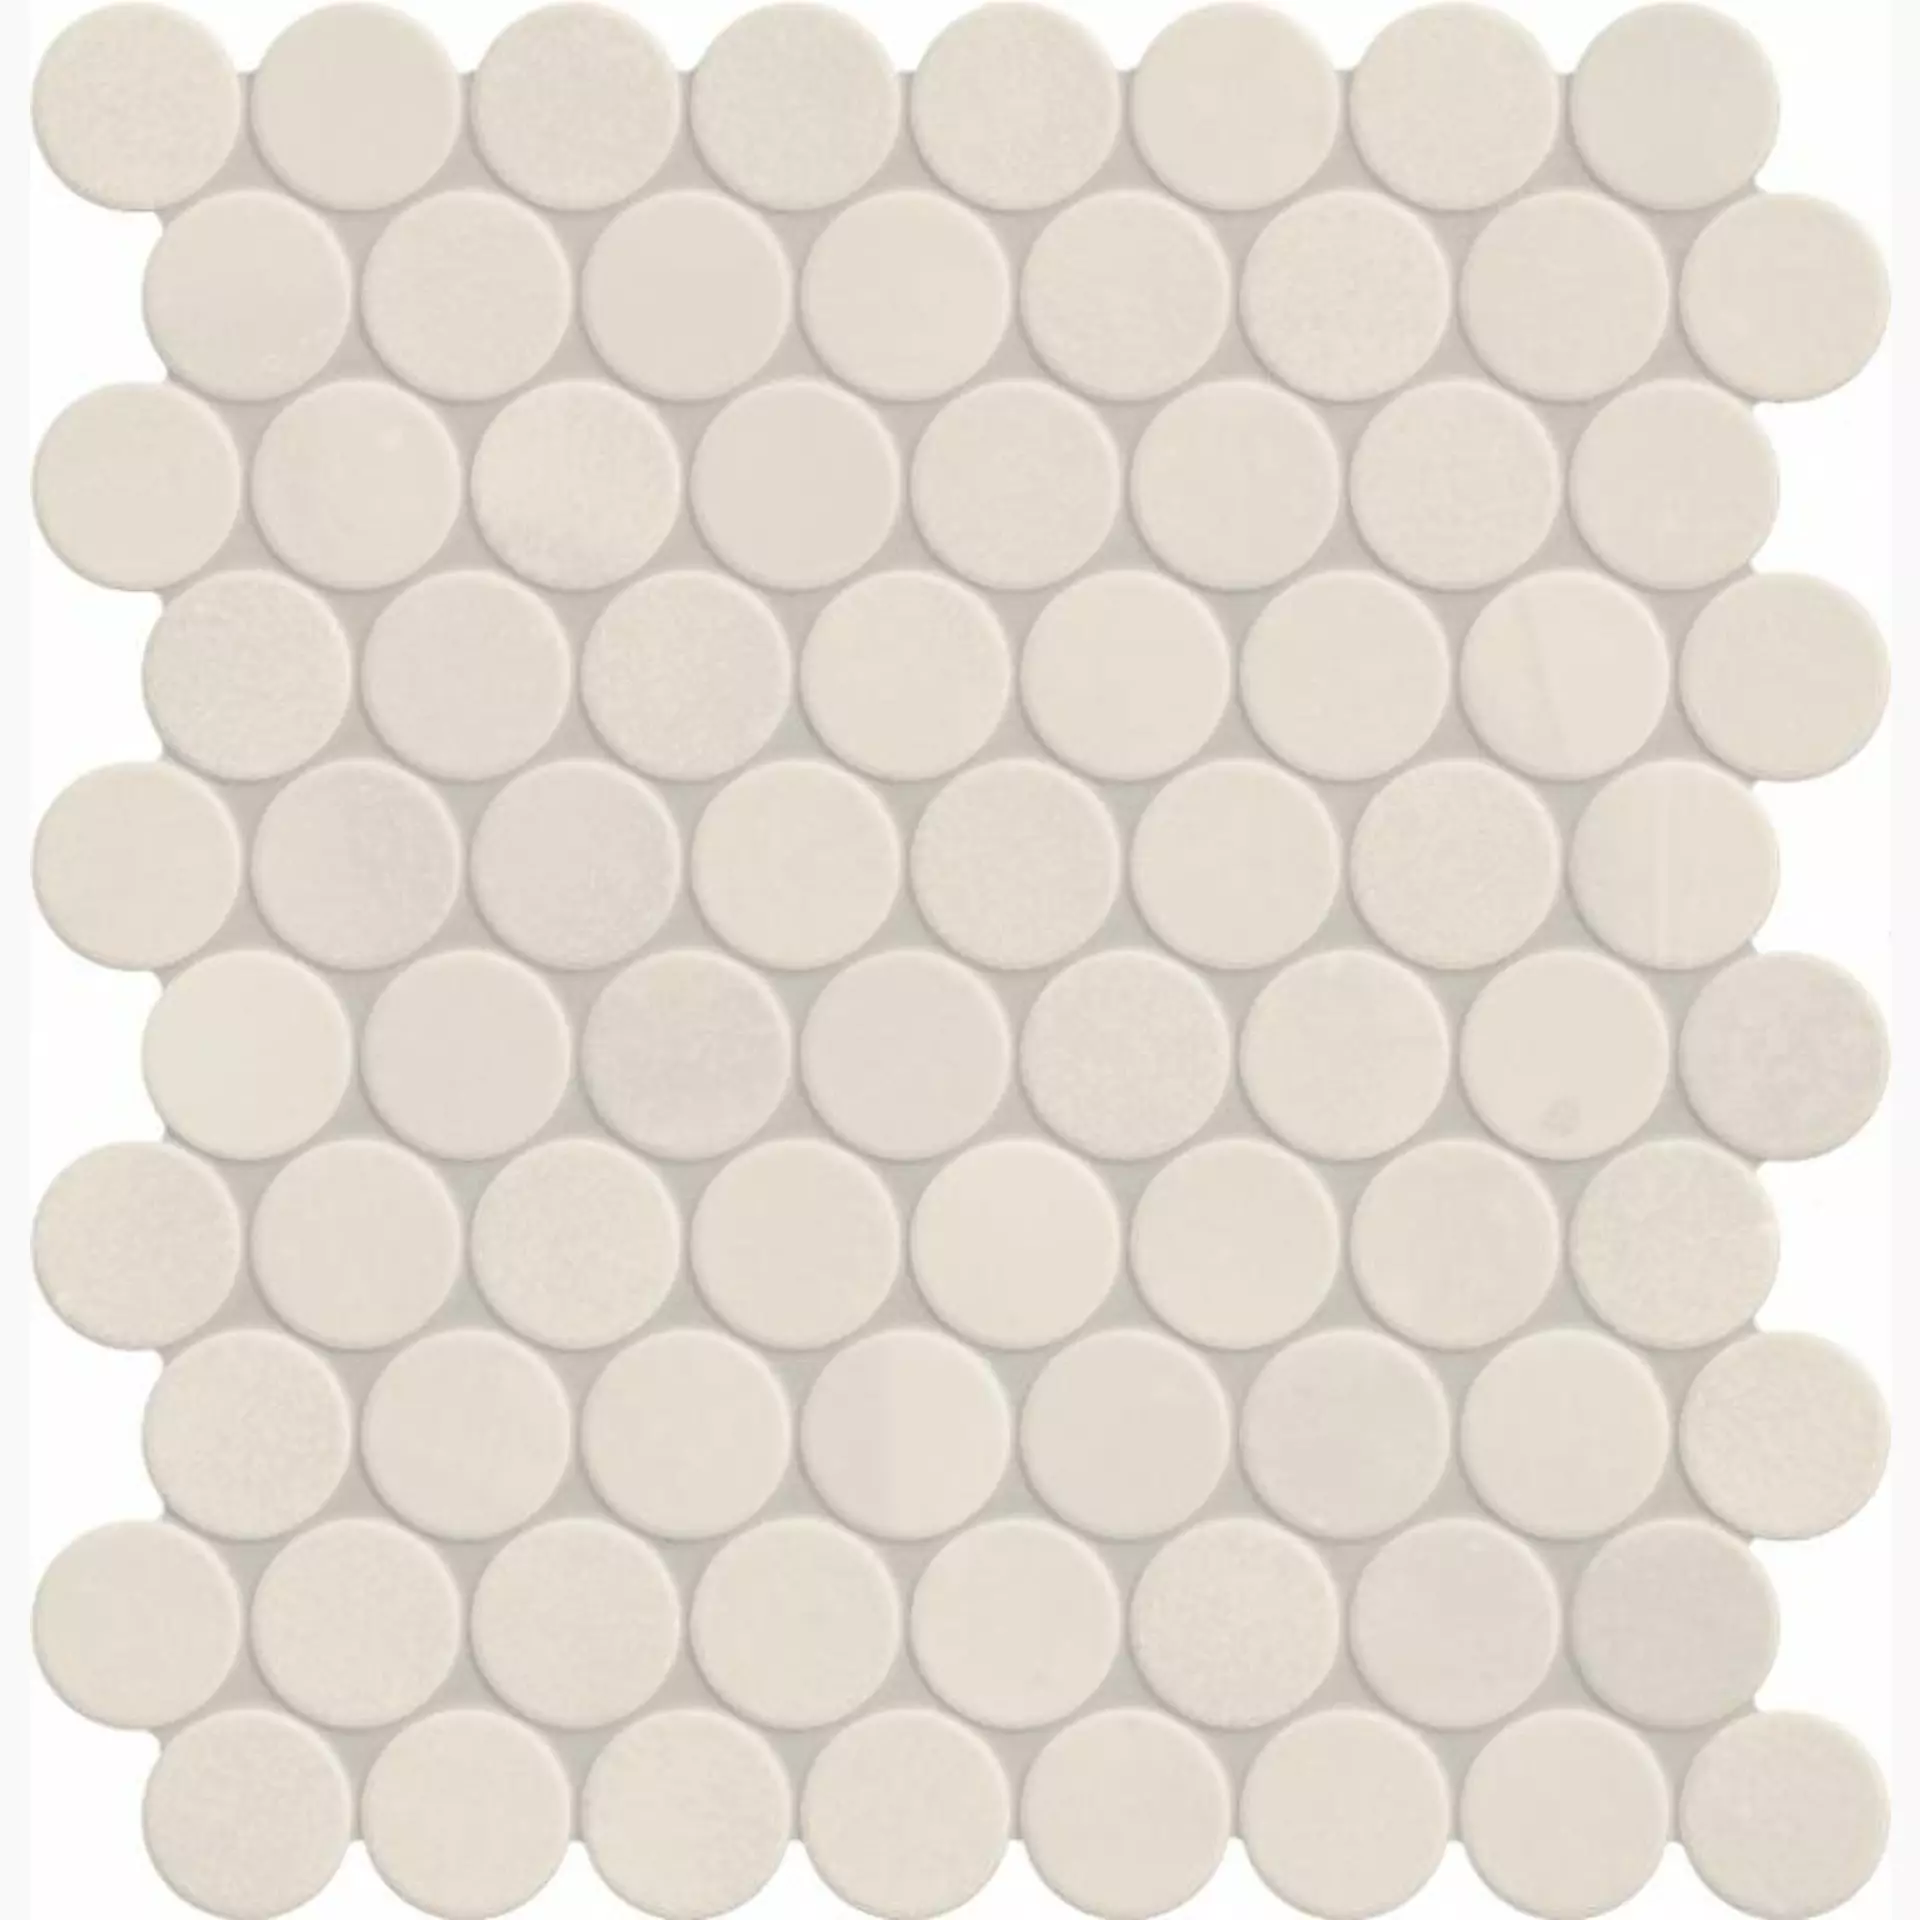 Fondovalle Res Art Talc Natural Mosaic Ball RES171 28,8x31,2cm rectified 6,5mm